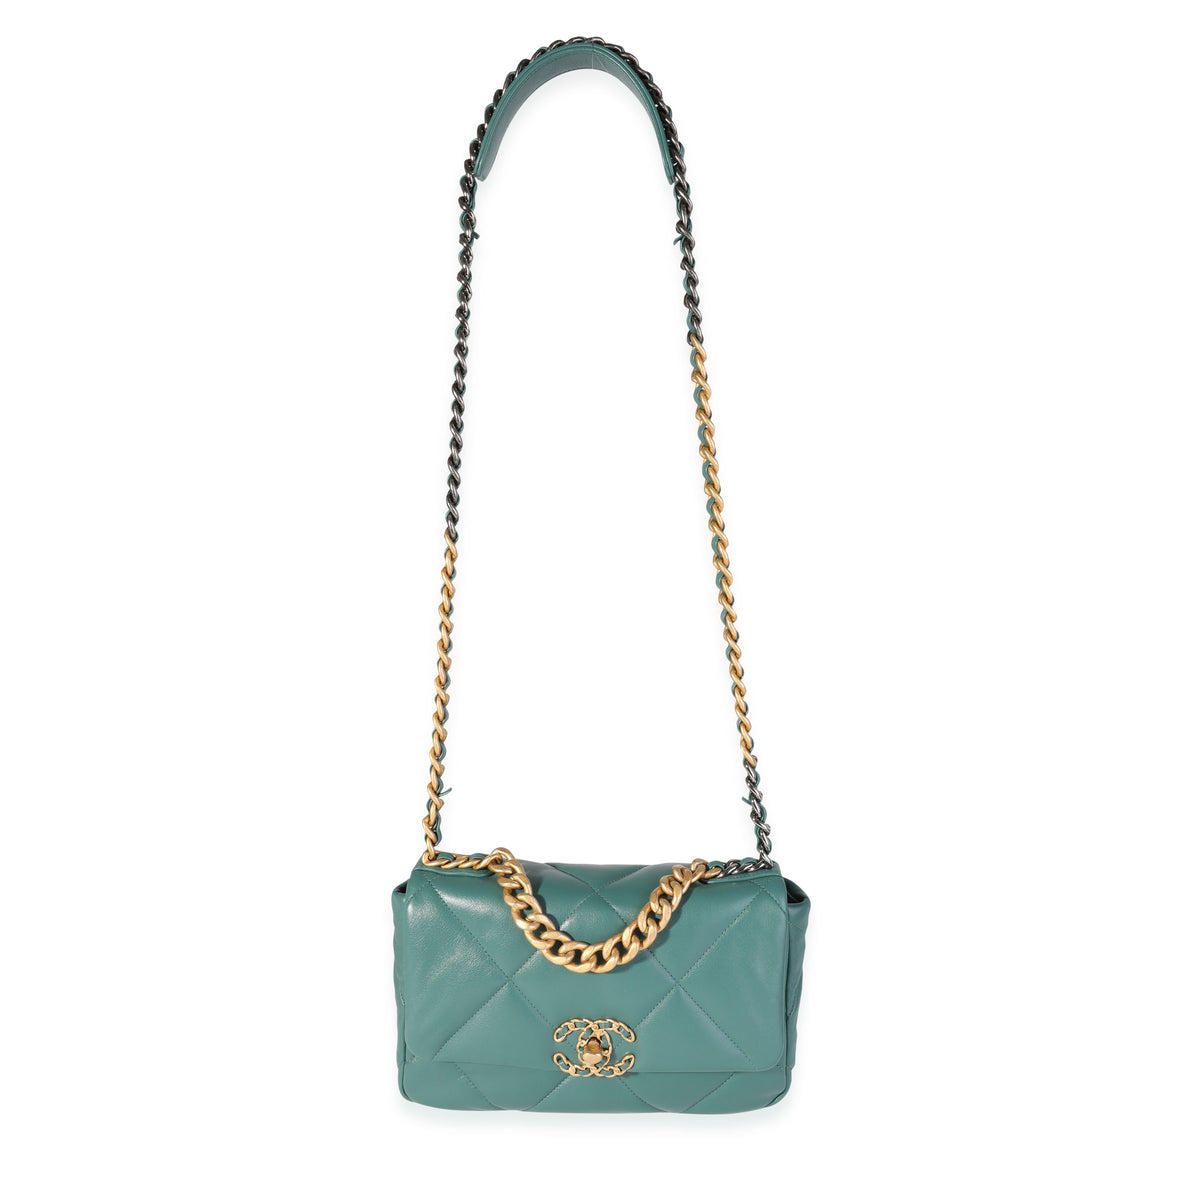 Chanel 19 leather handbag Chanel Green in Leather - 34259489